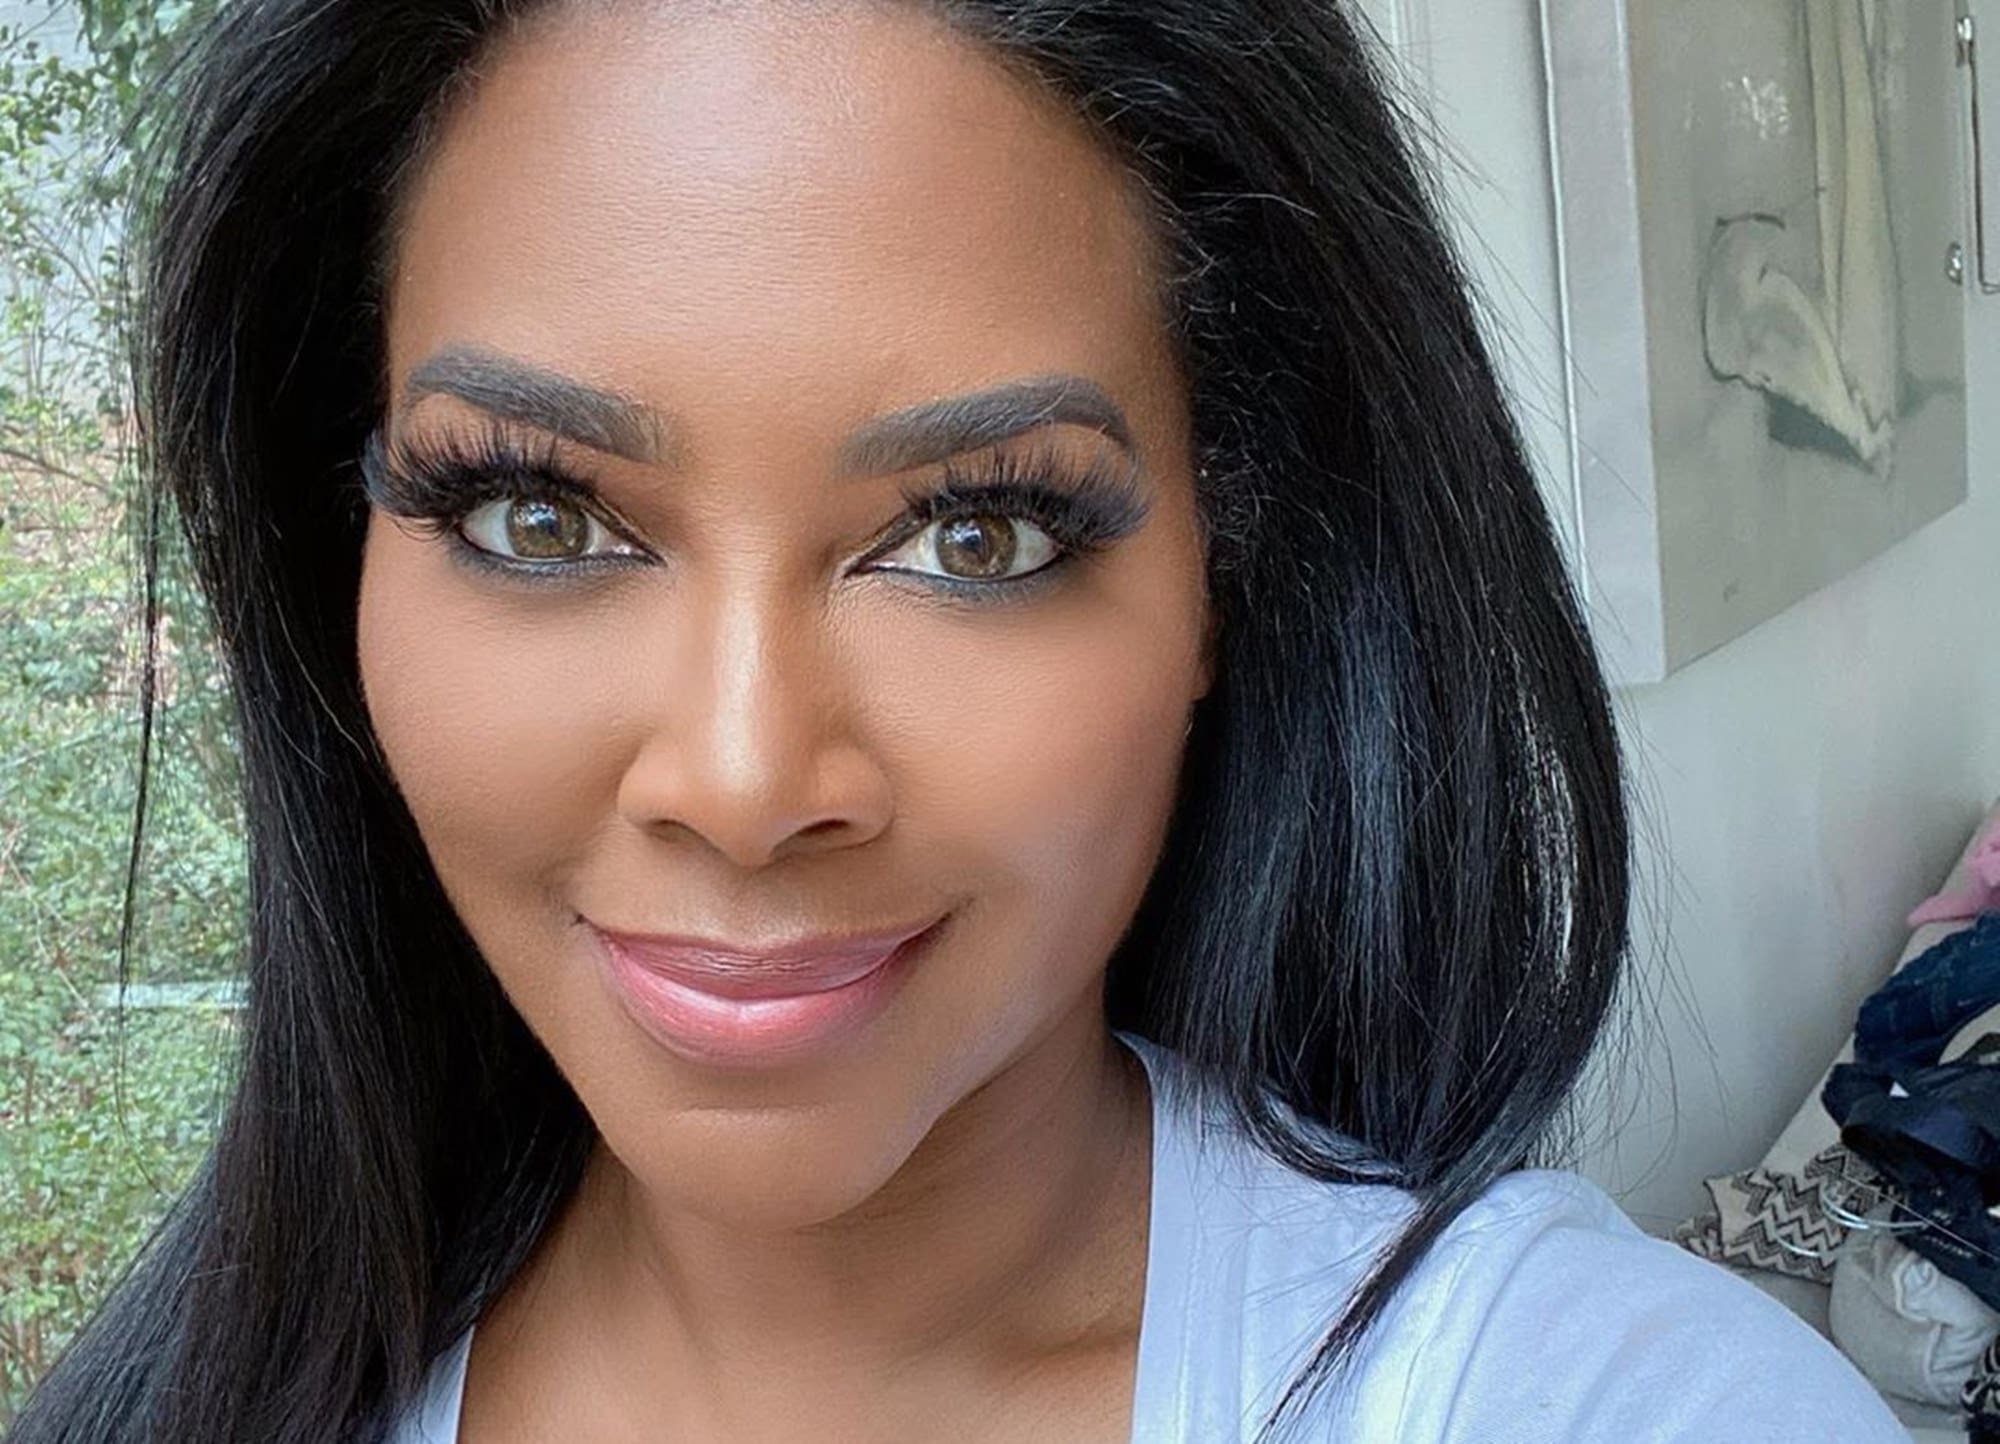 Kenya Moore Is Looking For An Assistant - See If You're Fit For The Job